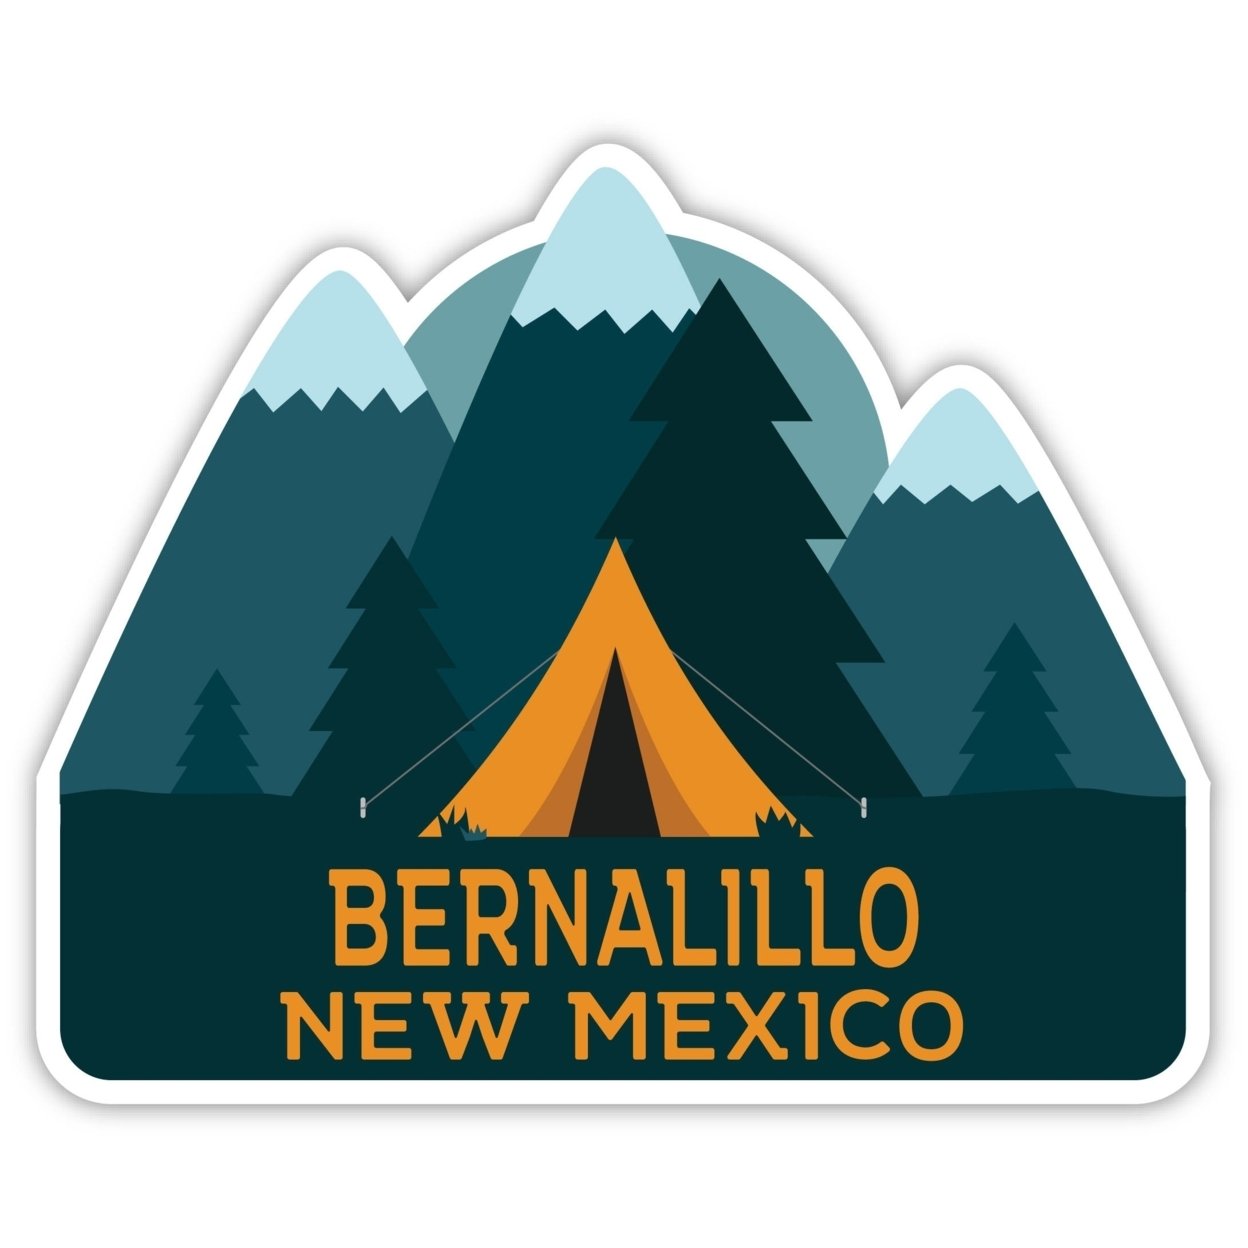 Bernalillo New Mexico Souvenir Decorative Stickers (Choose Theme And Size) - 4-Pack, 8-Inch, Tent